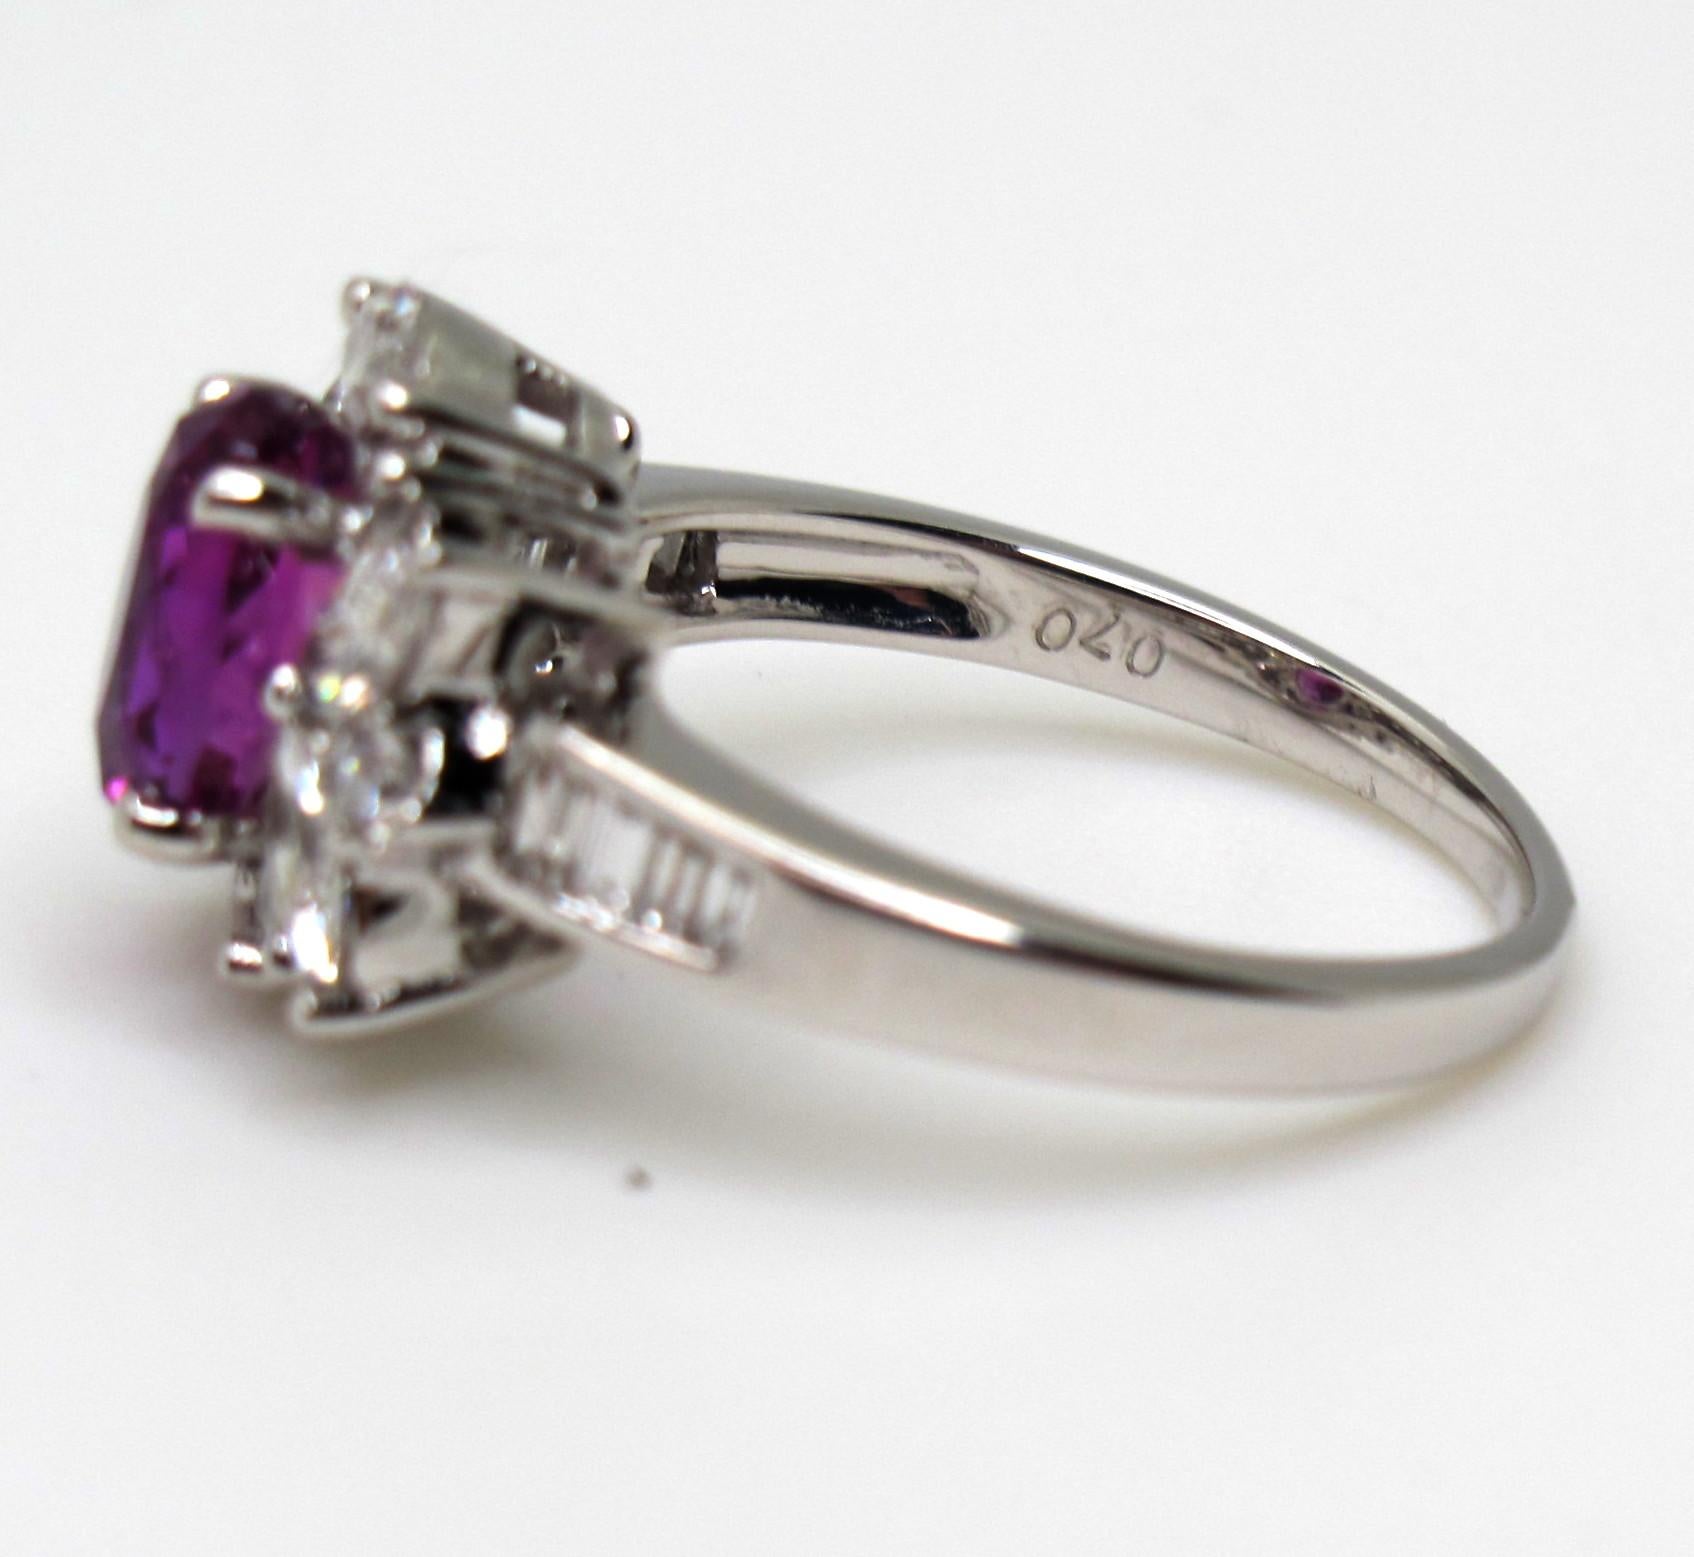 2.27 ct. Hot Pink Sapphire Oval, Diamond Marquise 18k White Gold Cocktail Ring 2